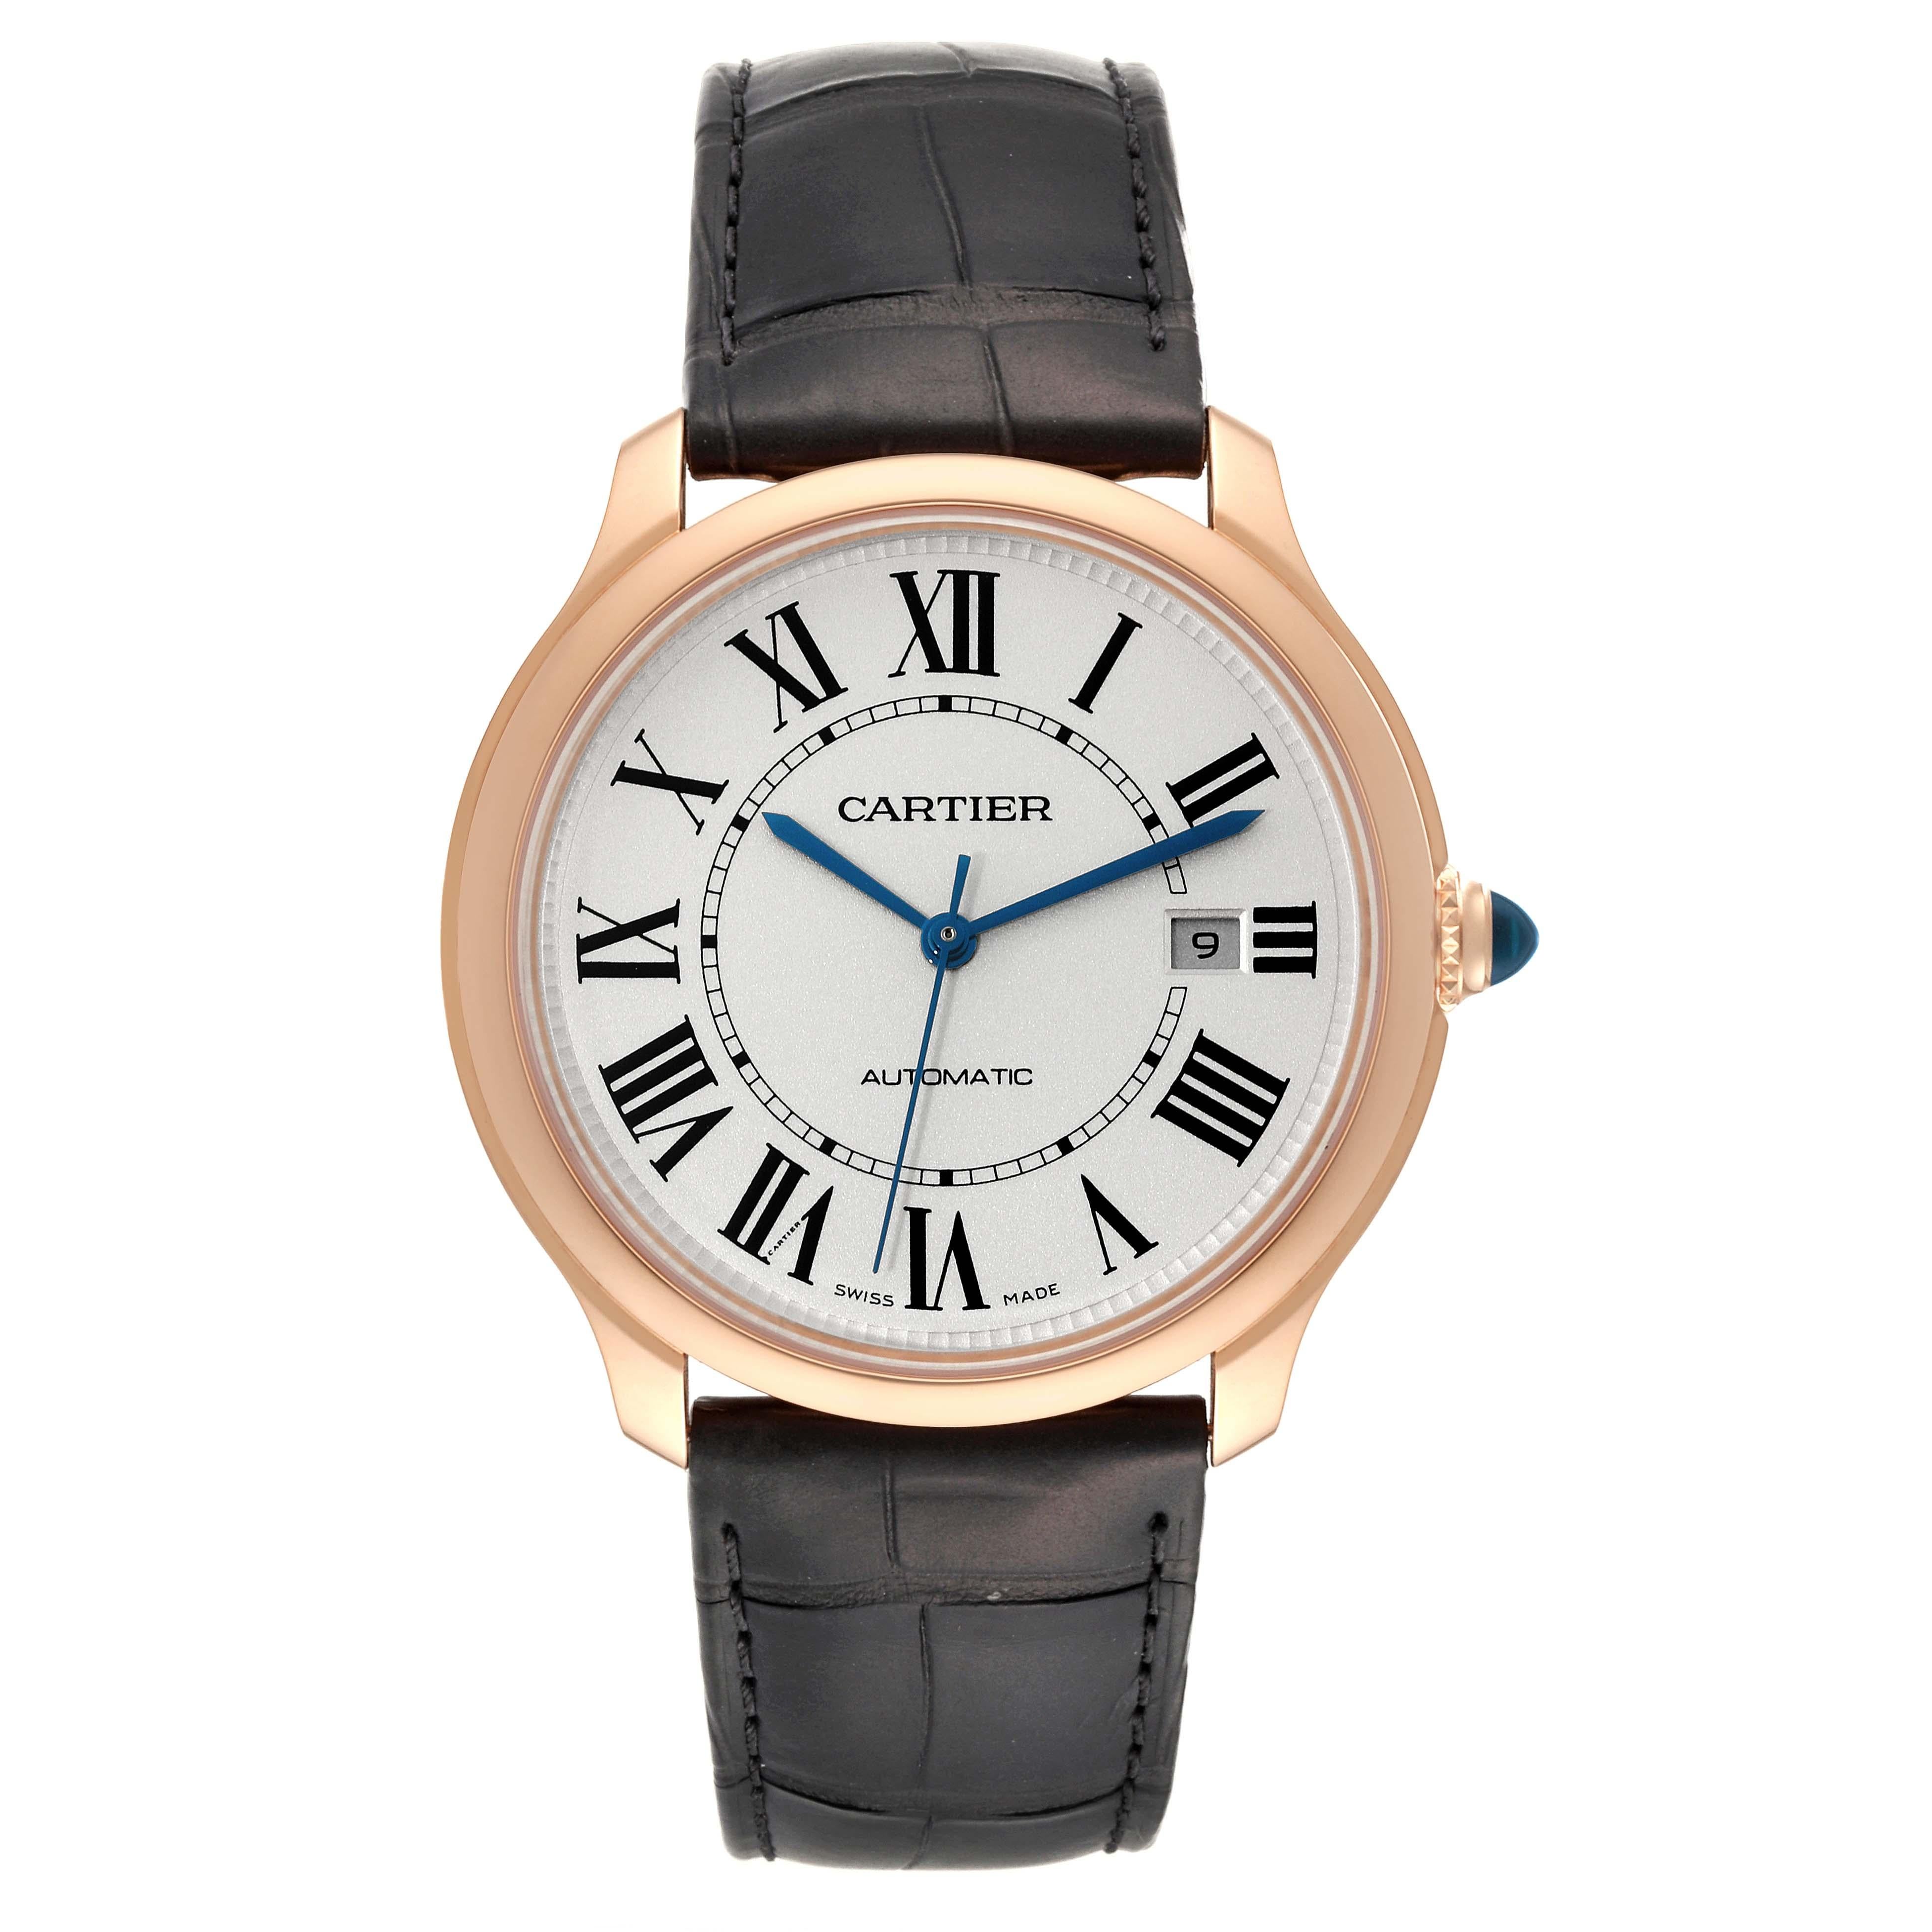 Cartier Ronde Louis Rose Gold Silver Dial Automatic Mens Watch WGRN0011. Automatic self-winding movement. 18k rose gold case 40.0 mm in diameter. Transparent exhibition sapphire crystal caseback. Beaded crown set with blue sapphire cabochon. .